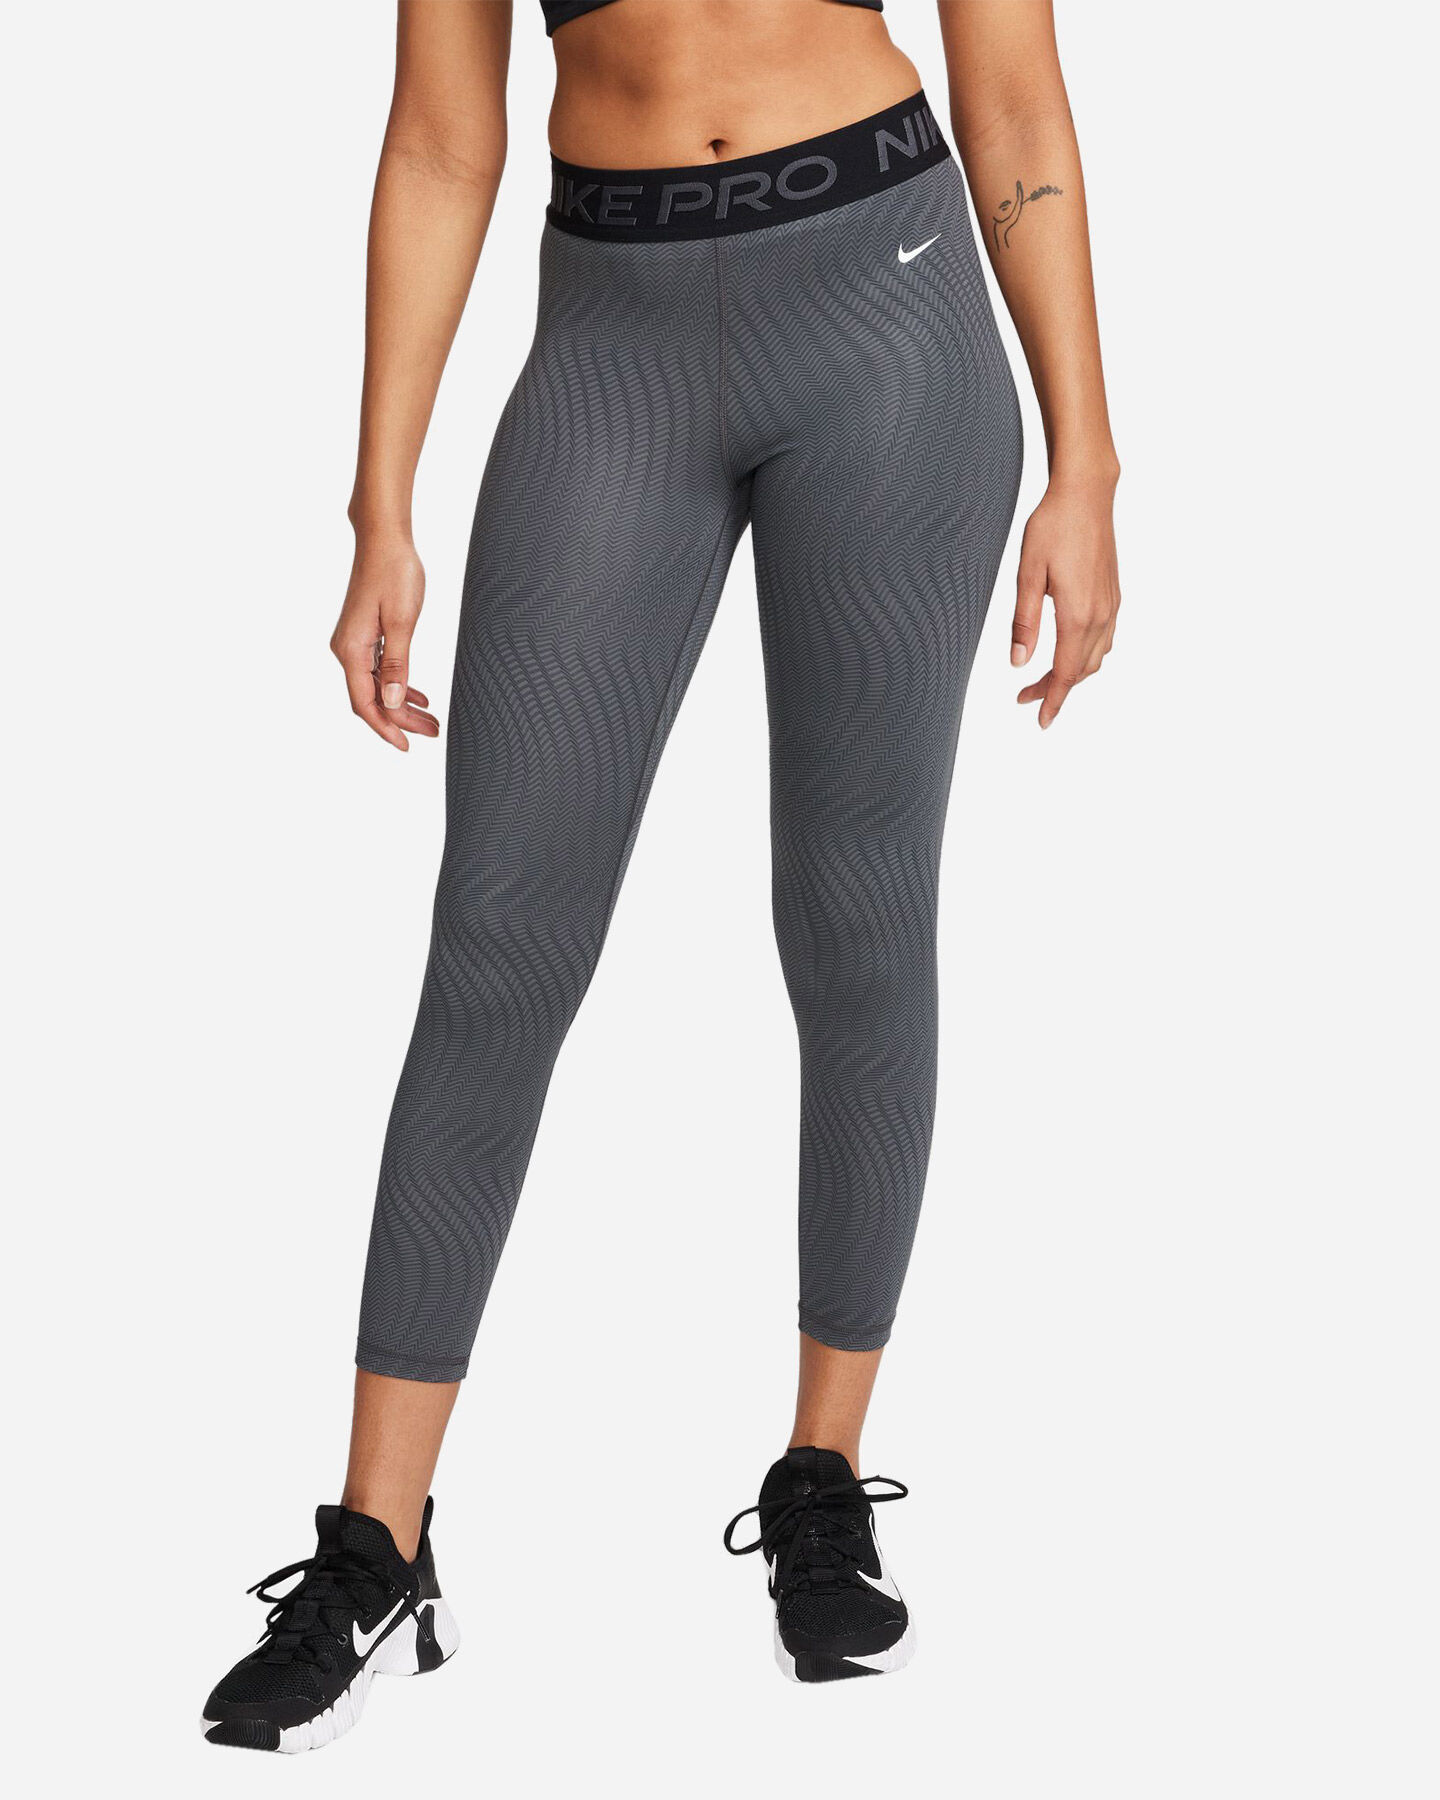  Leggings NIKE PRO ALL OVER PRINTED W S5644775|060|XS scatto 0